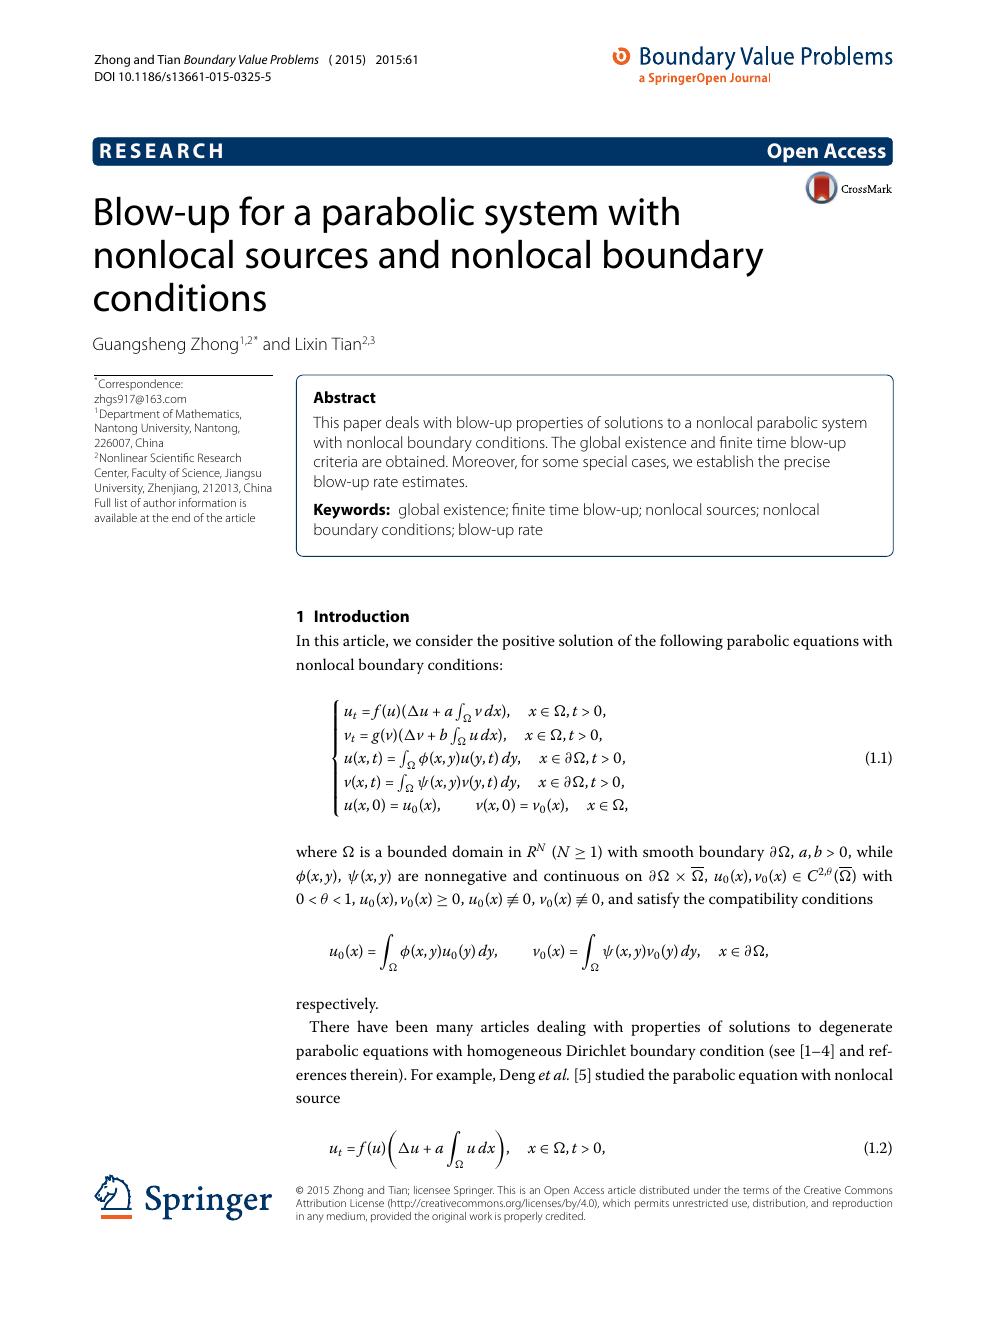 Blow Up For A Parabolic System With Nonlocal Sources And Nonlocal Boundary Conditions Topic Of Research Paper In Mathematics Download Scholarly Article Pdf And Read For Free On Cyberleninka Open Science Hub